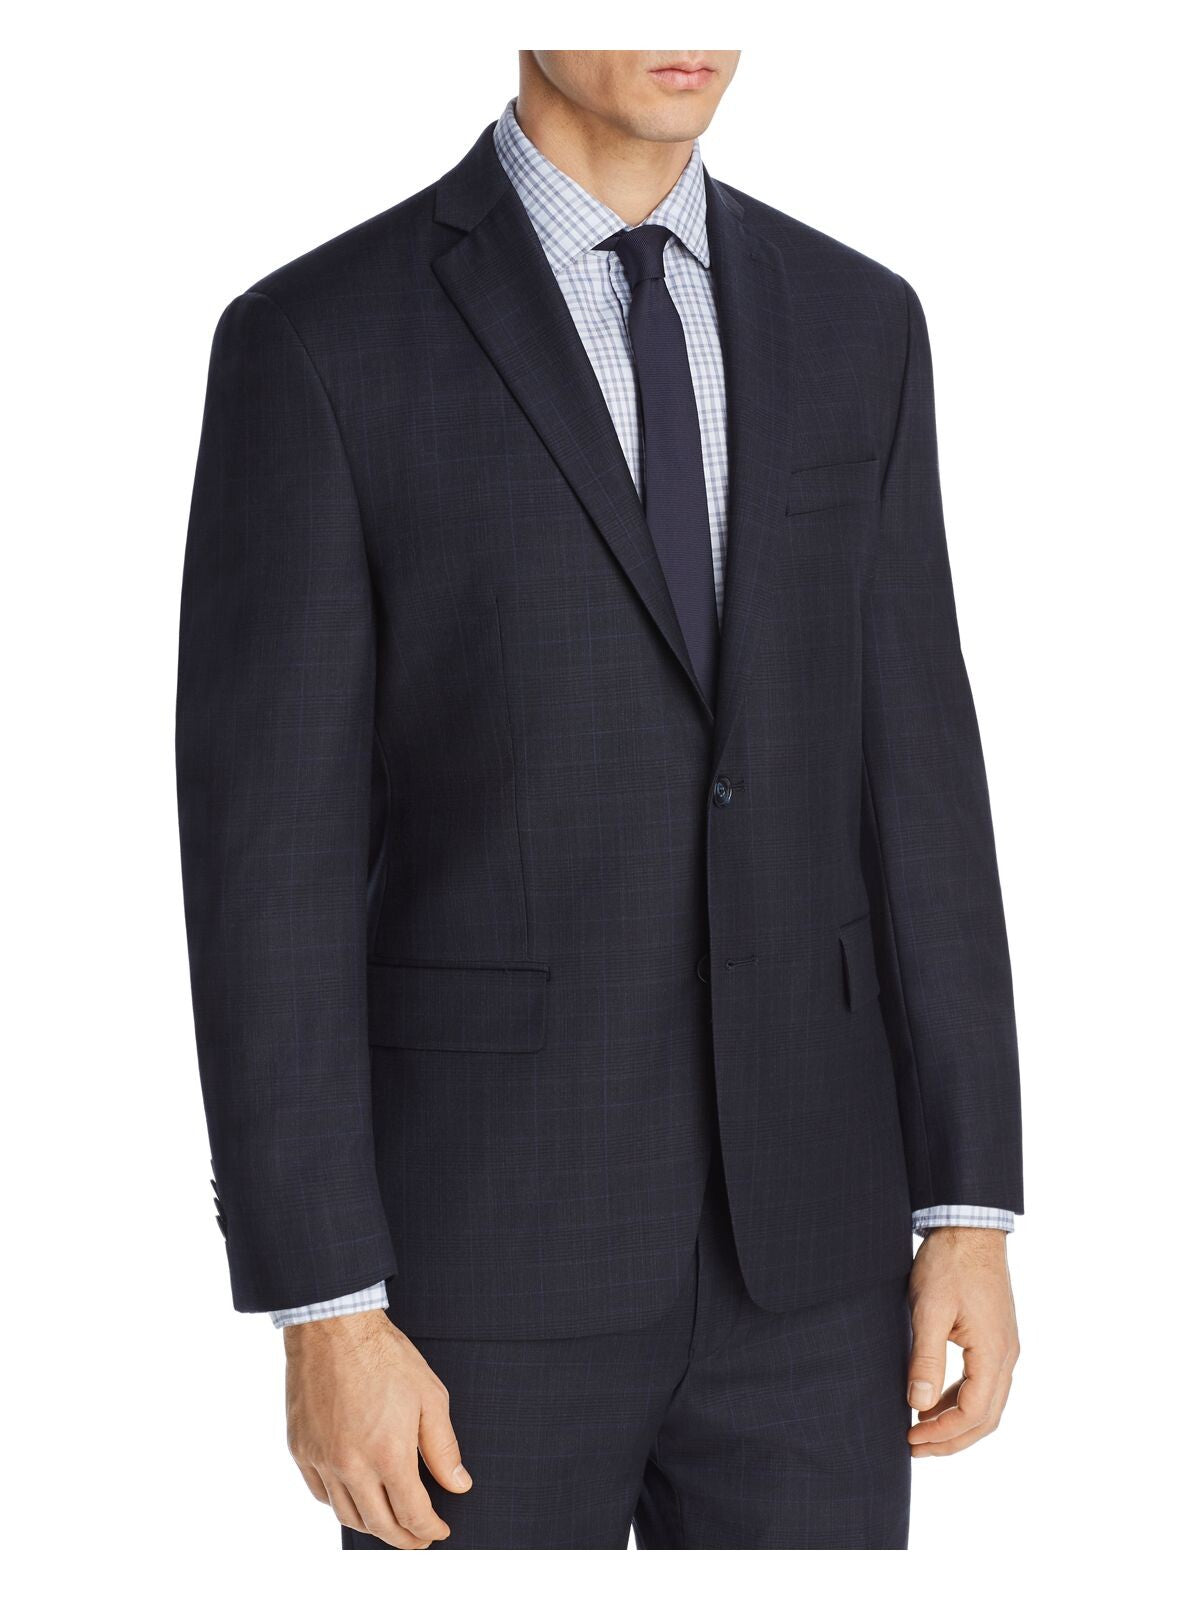 MICHAEL KORS Mens Navy Single Breasted, Windowpane Plaid Classic Fit Suit Separate Blazer Jacket 40S